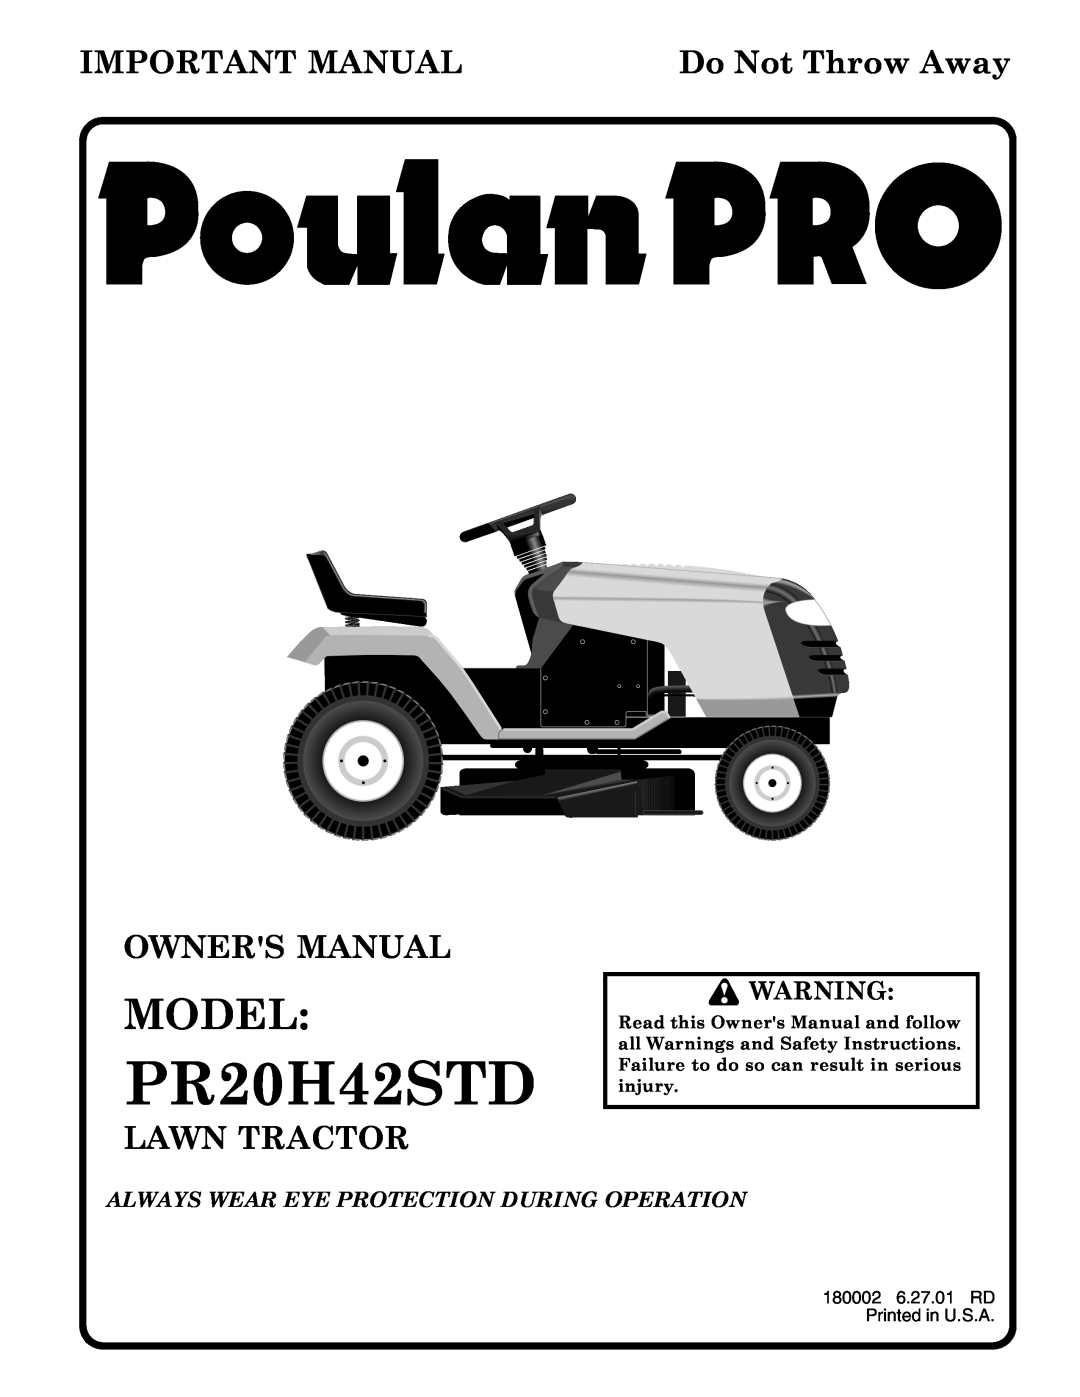 Poulan 180002 owner manual Model, PR20H42STD, Important Manual, Do Not Throw Away, Owners Manual, Lawn Tractor 